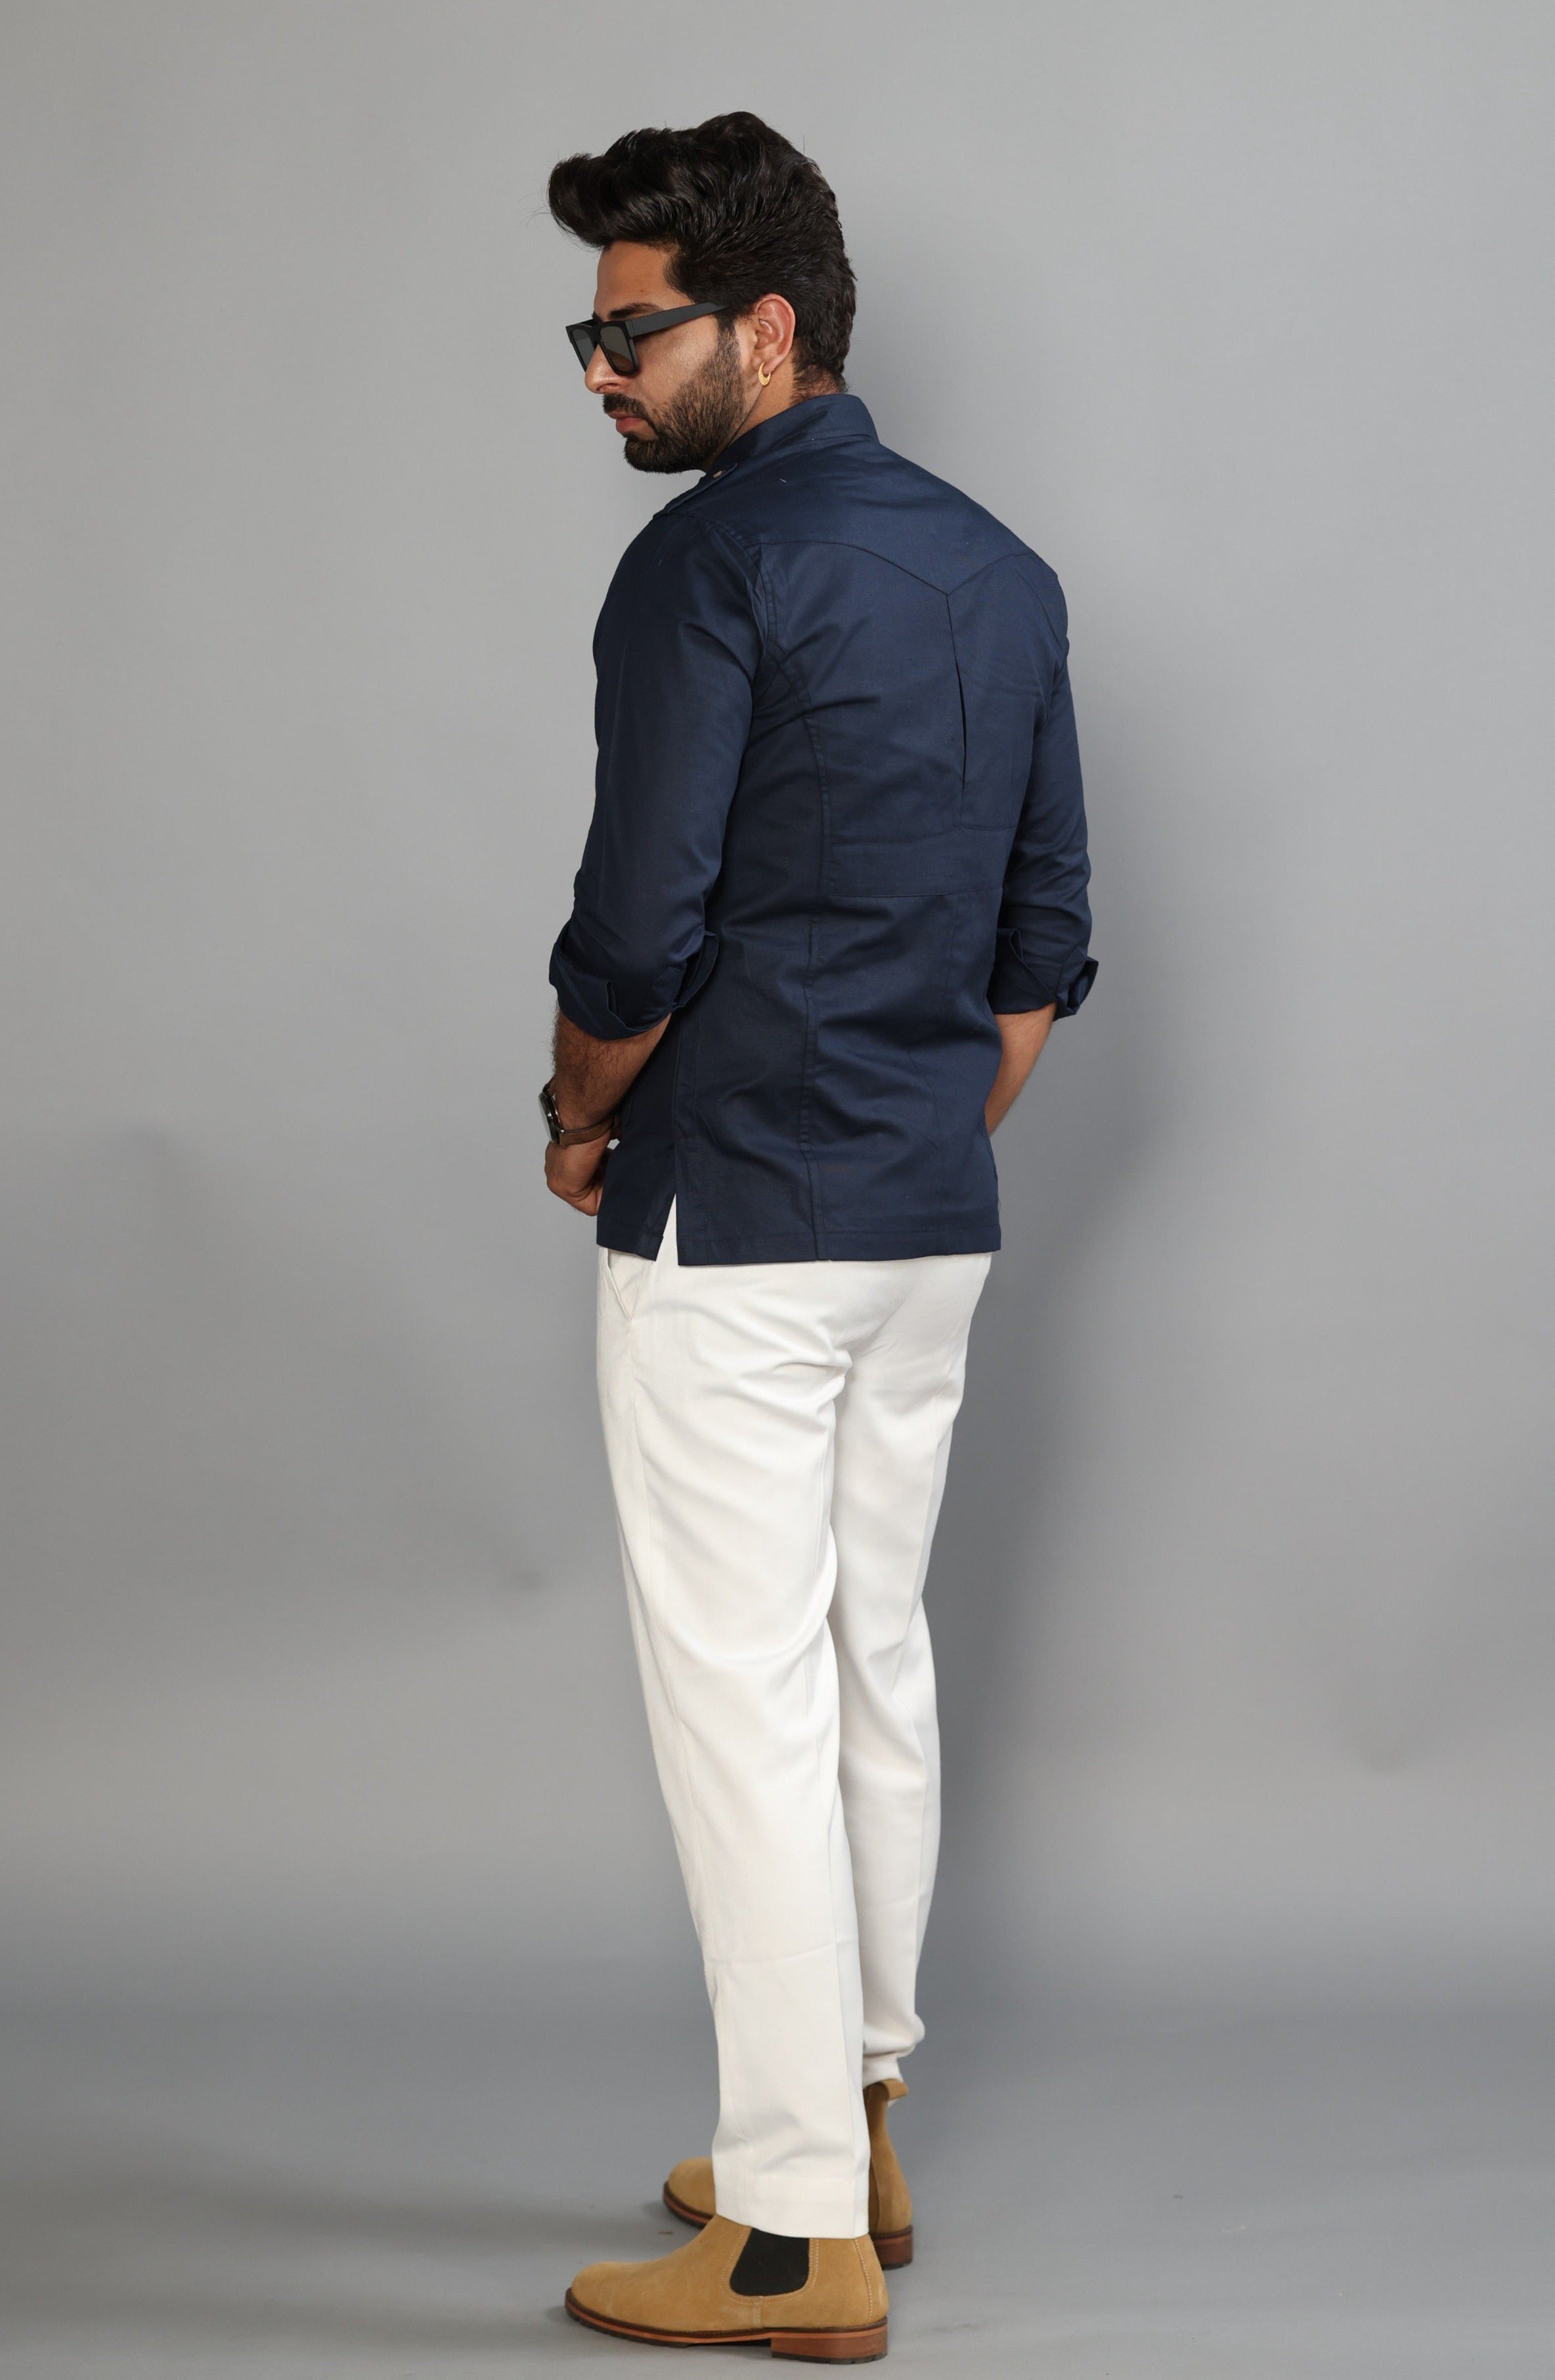 Buy Blue Chino Pants for Men at SELECTED HOMME |194862204